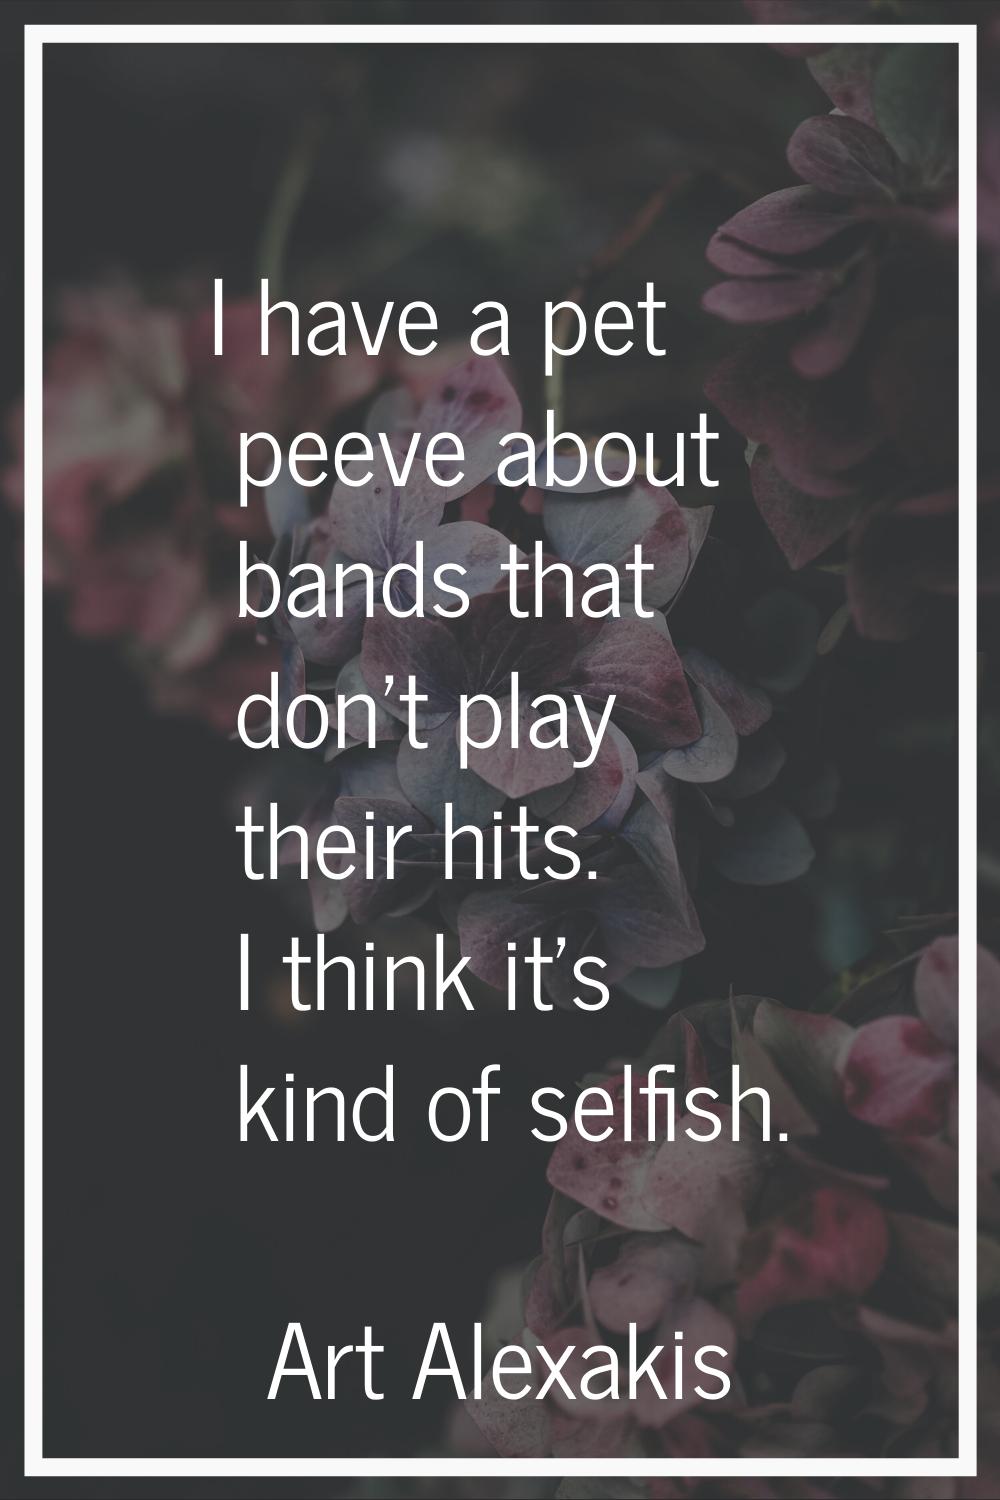 I have a pet peeve about bands that don't play their hits. I think it's kind of selfish.